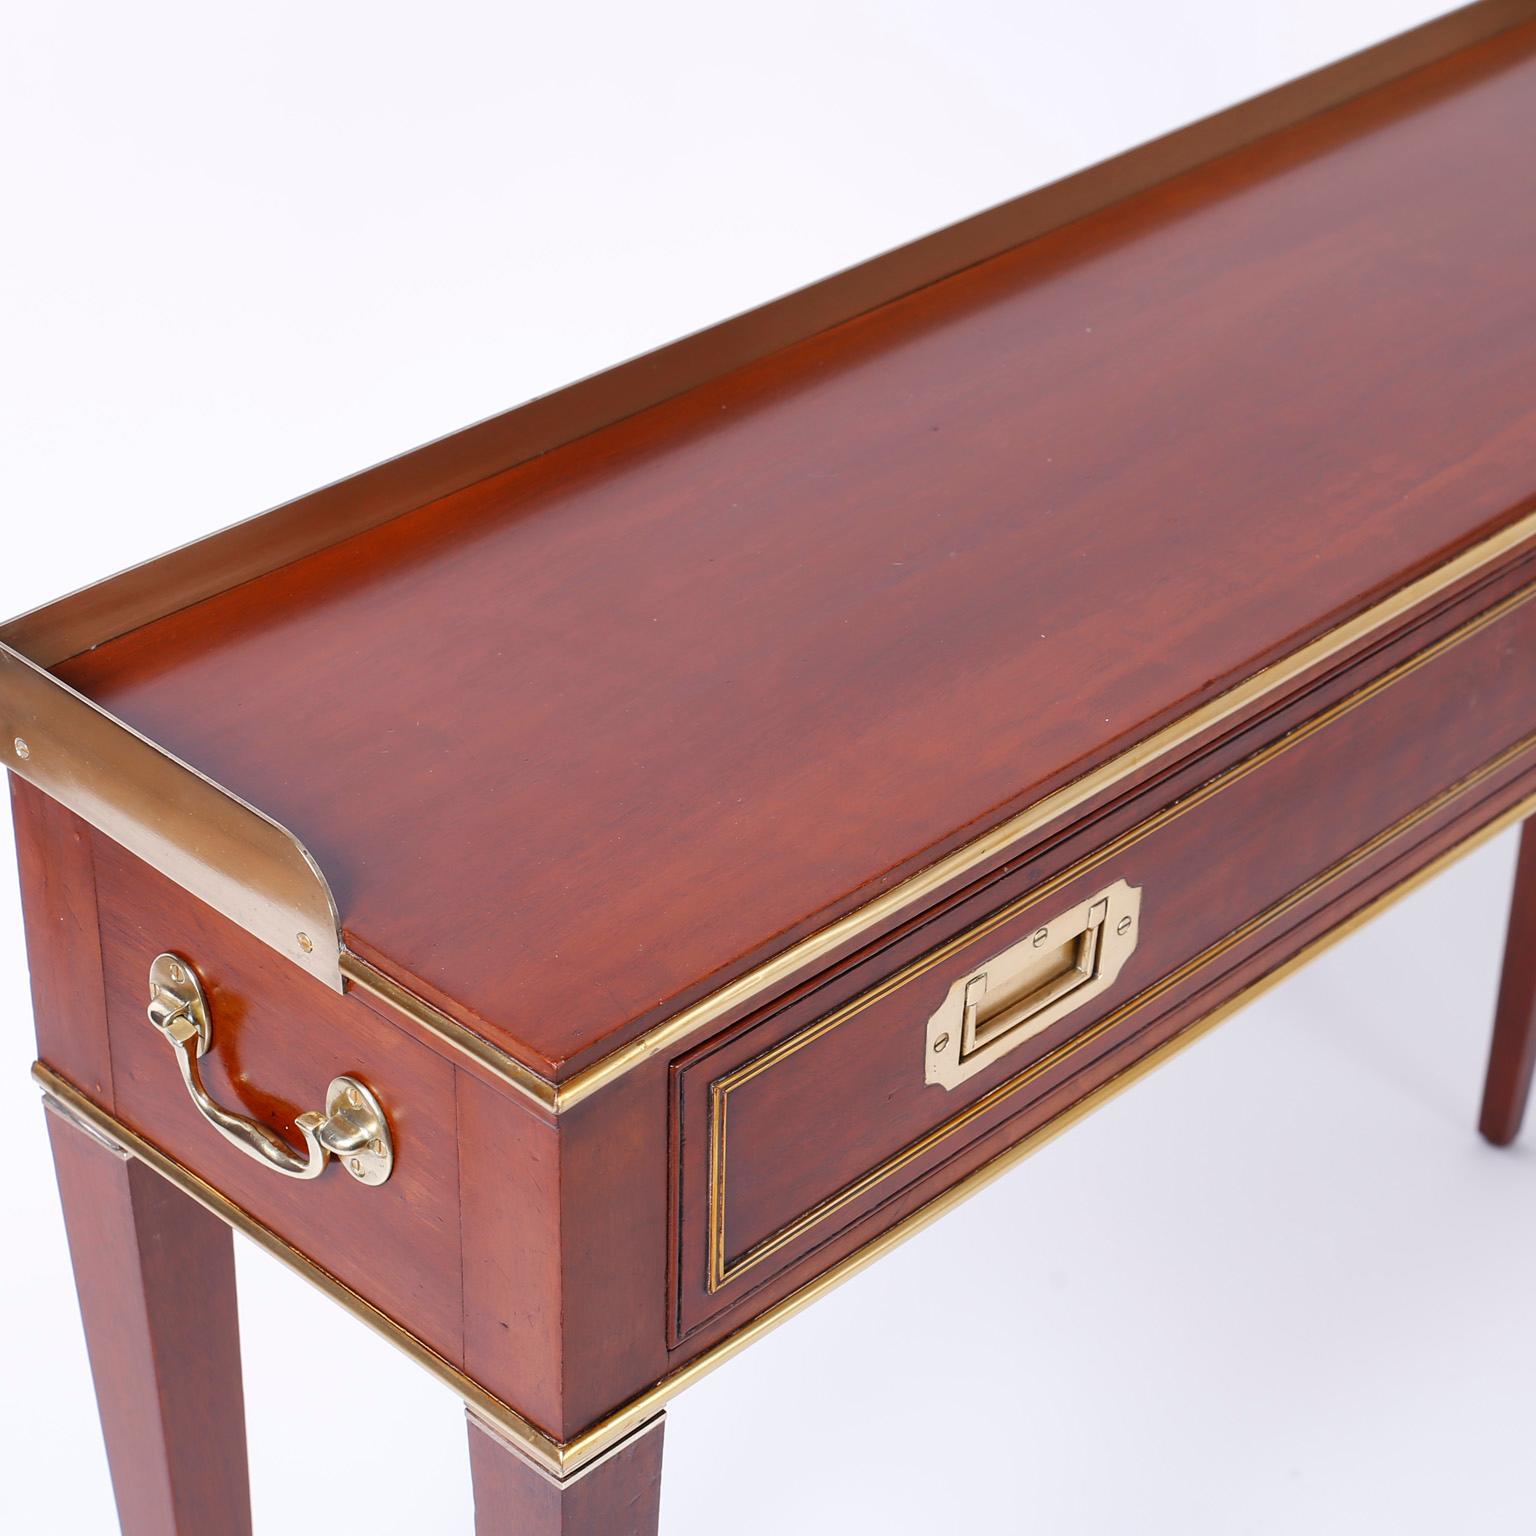 Refined mahogany campaign style server, console, or bar featuring a desirable slim profile, brass gallery, brass hardware, and a dapper form with sleek tapered legs.